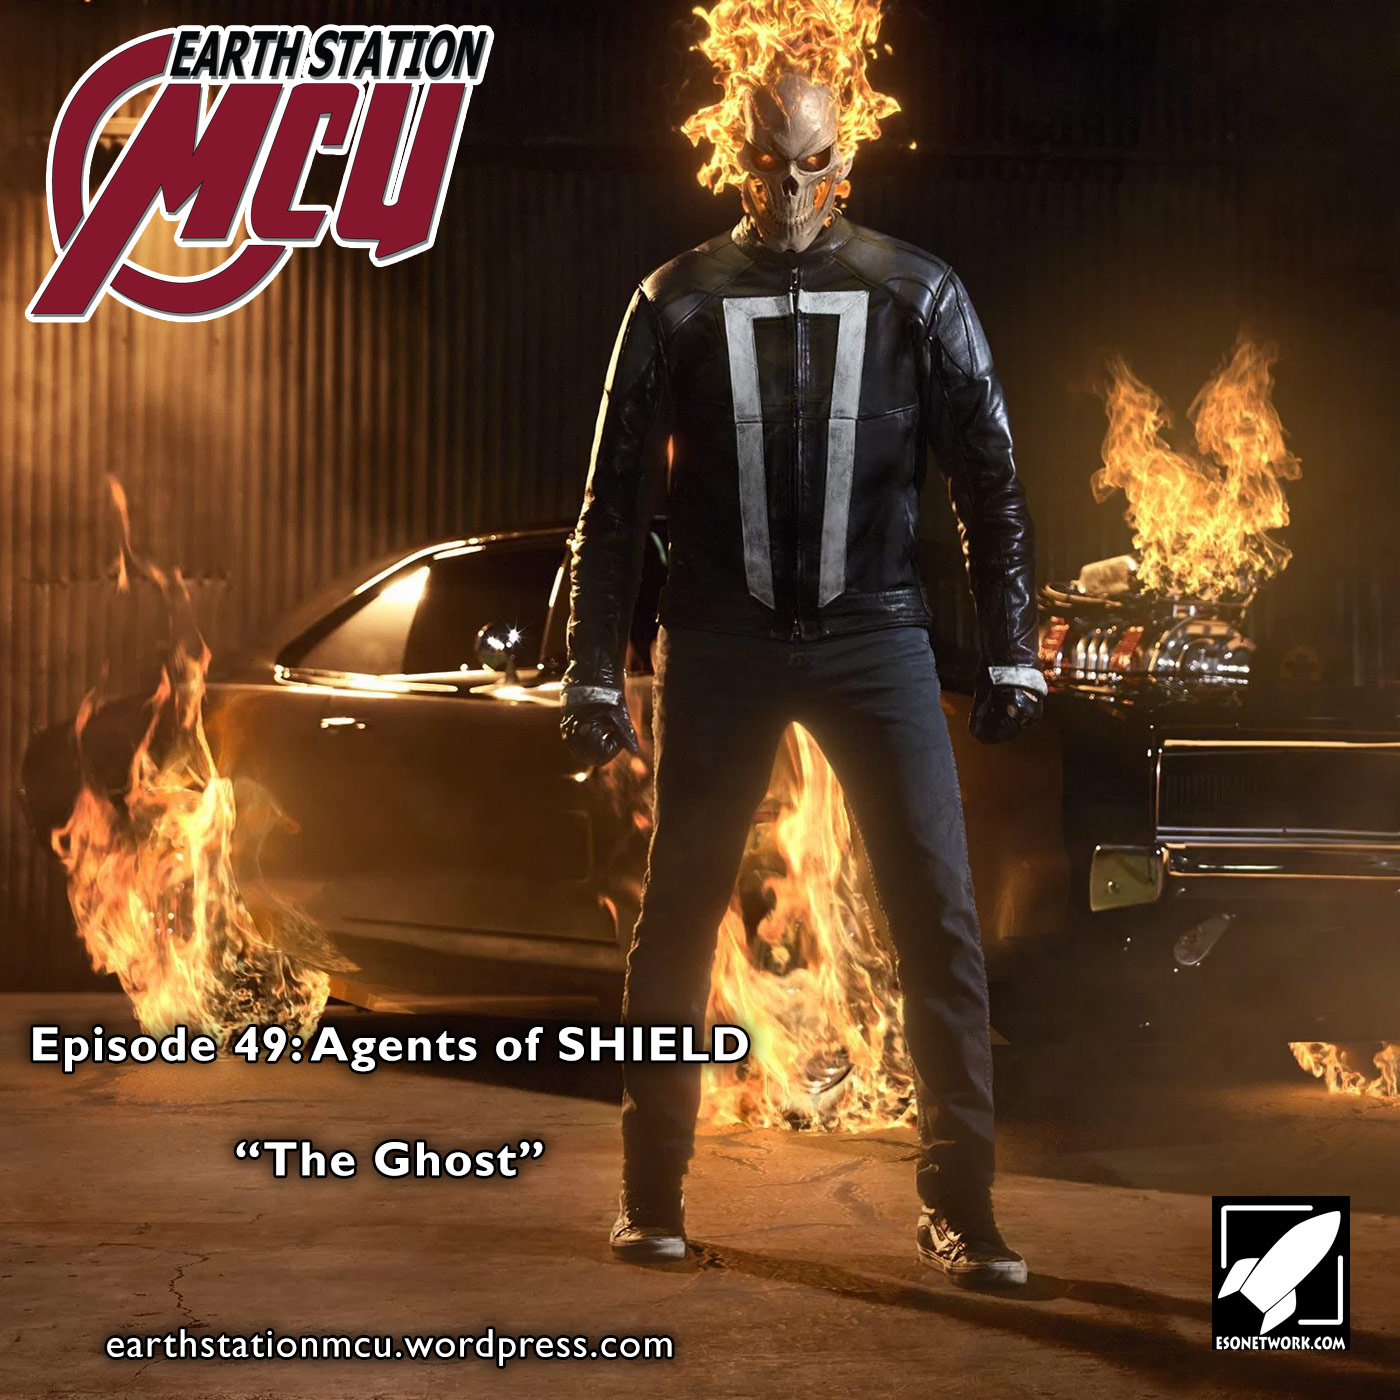 Earth Station MCU Episode 49: Agents of SHIELD ”The Ghost”